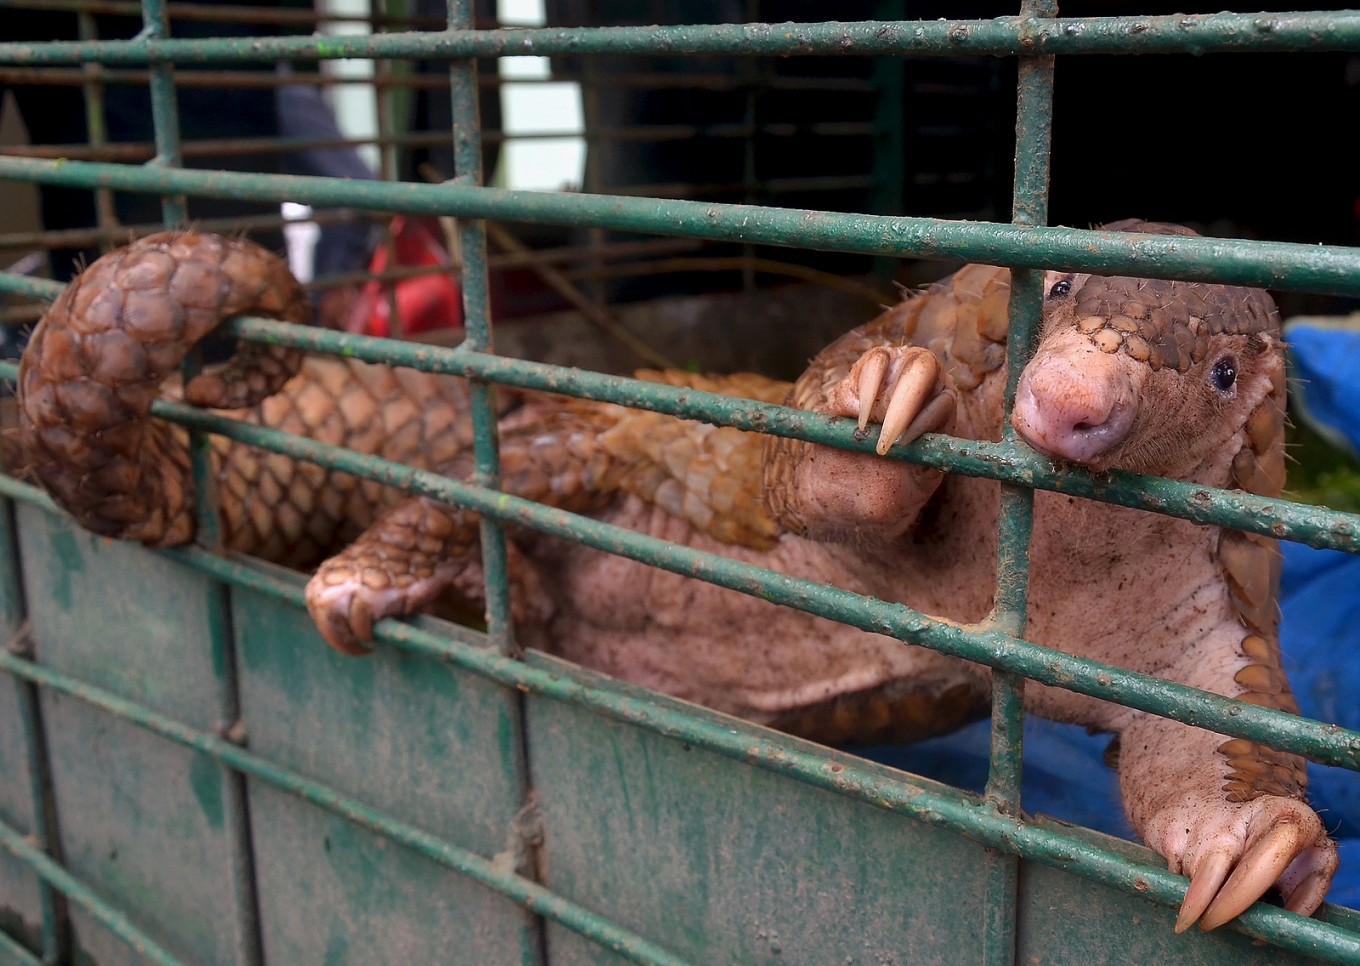 Indonesian pangolin faces extinction due to trafficking: Study